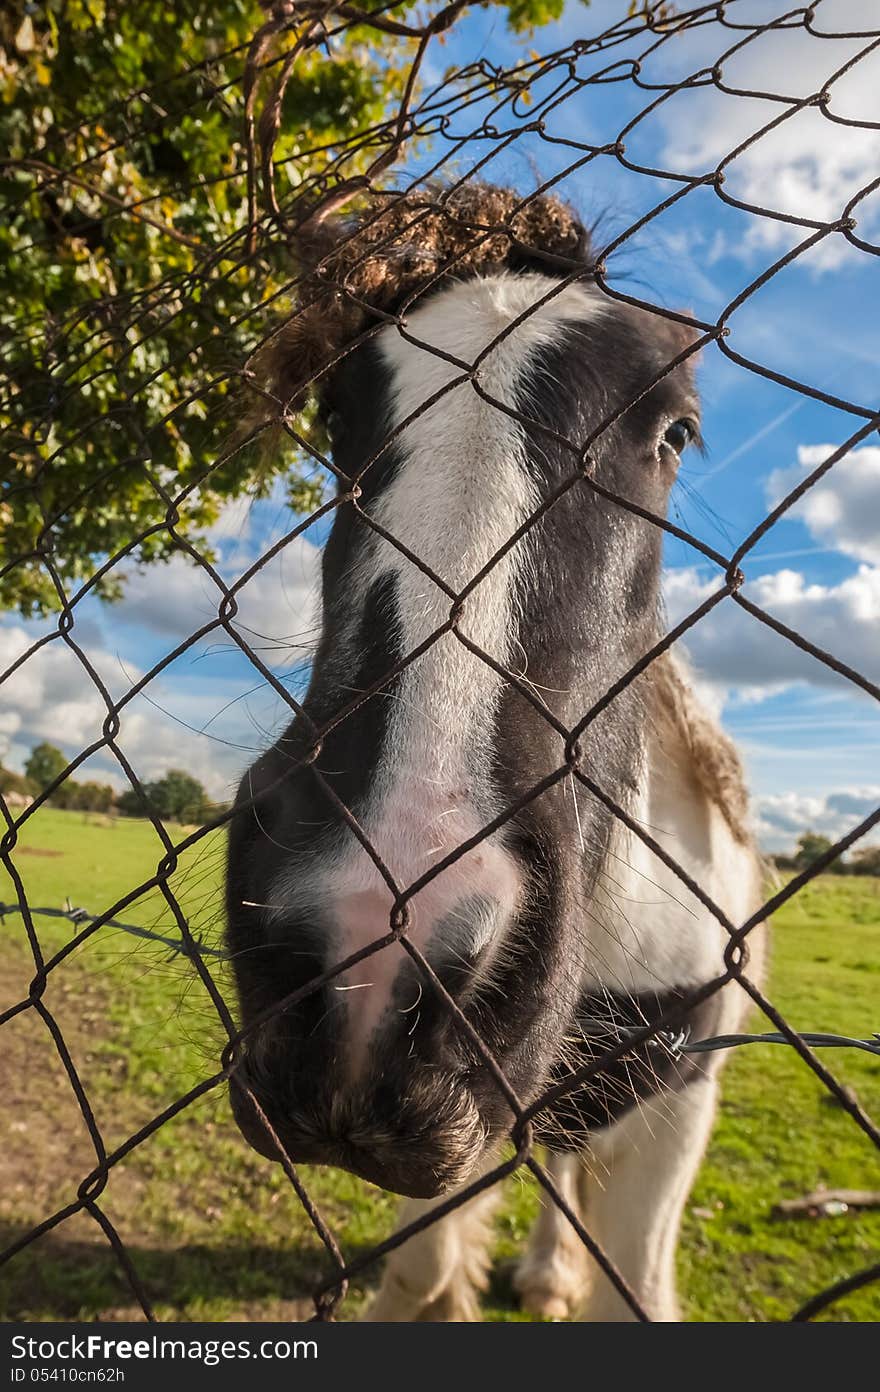 Distorted head of a pony behind wire fencing